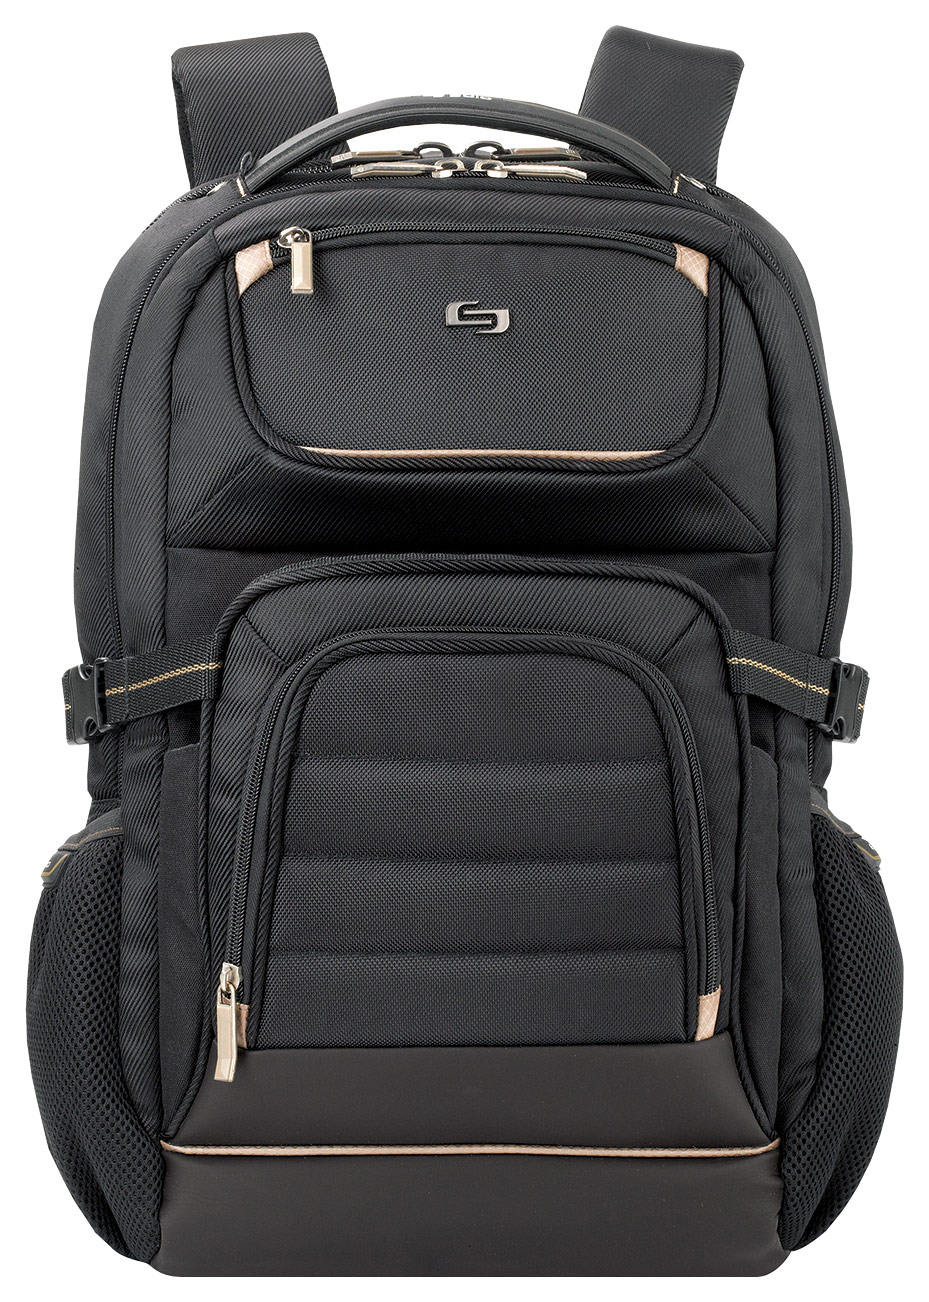 solo New York - Pro Laptop Backpack - Black/Gold was $75.99 now $58.99 (22.0% off)